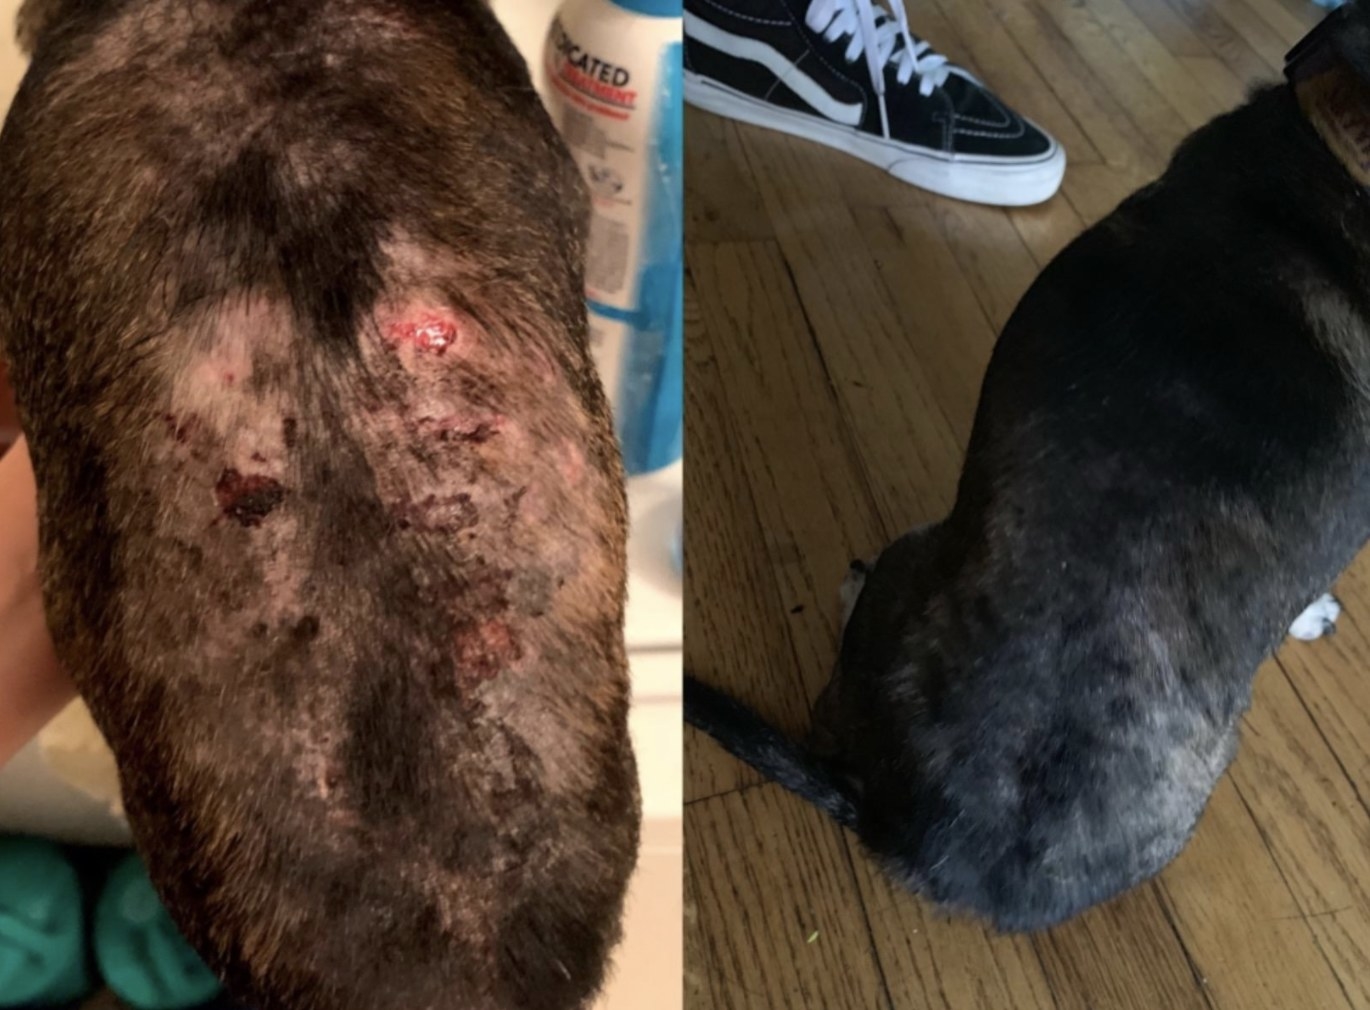 before and after taking the supplements. Before: dog with open wounds. After: dog with a shiny coat